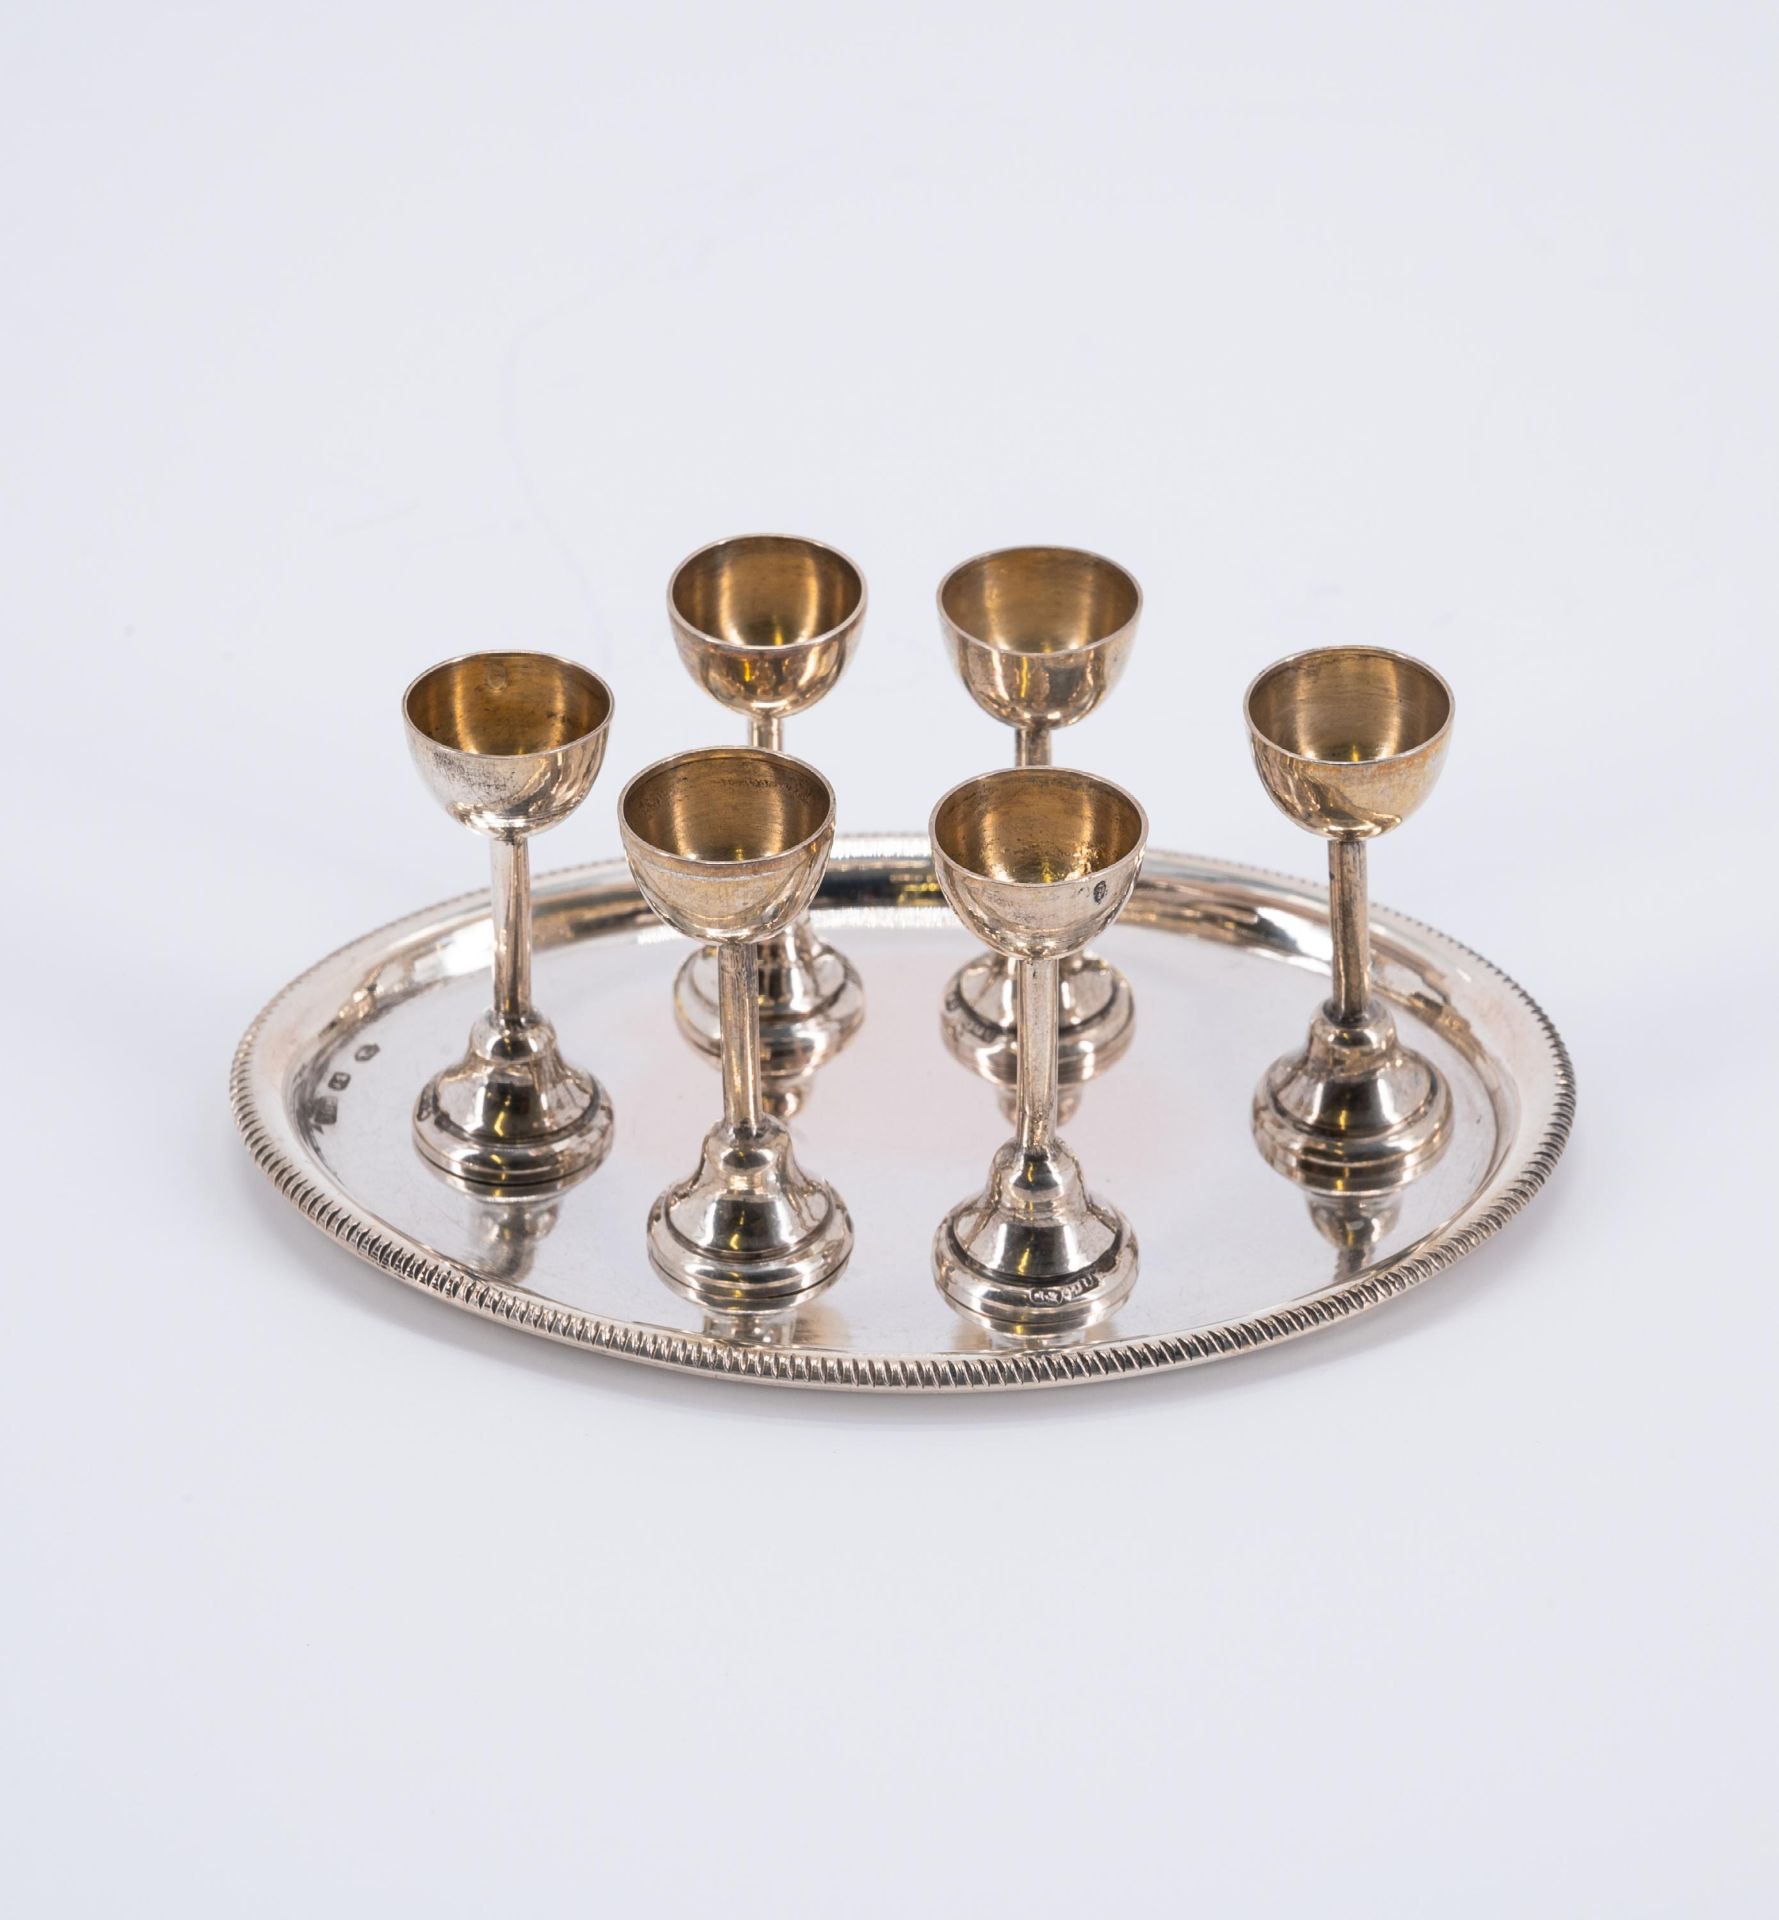 SILVER MINIATURE SERVICE, SIX MINIATURE PLATES AND TWICE SIX GOBLETS ON TRAY - Image 6 of 9